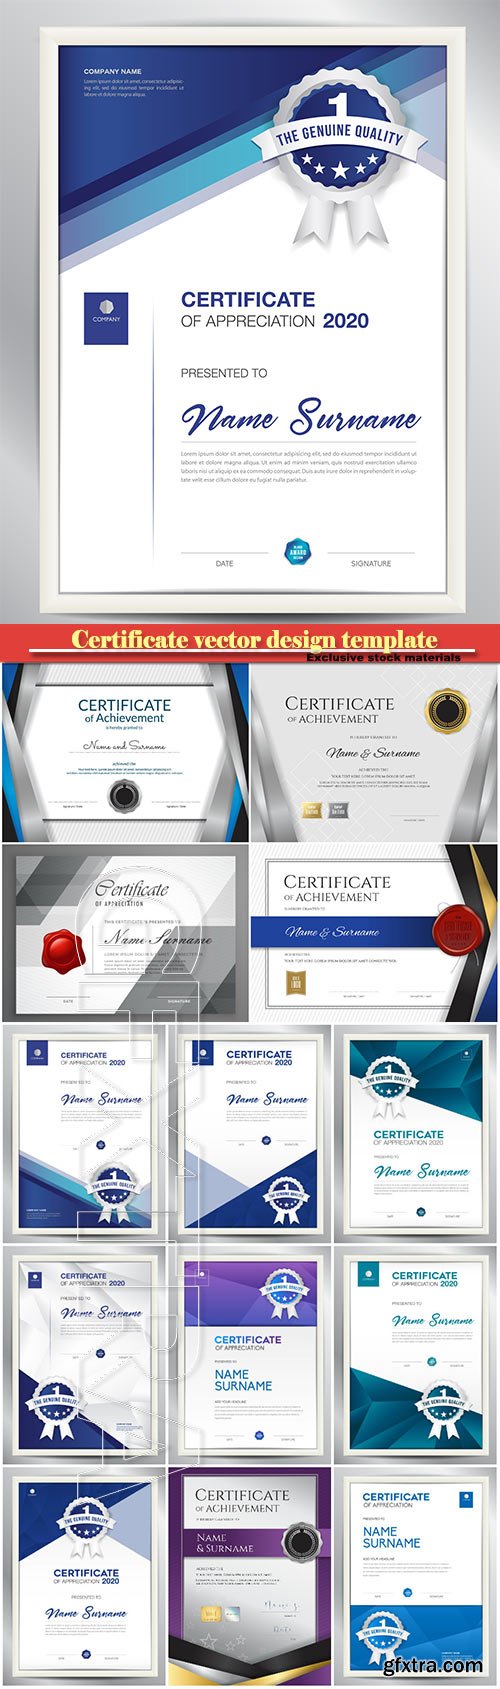 Certificate and vector diploma design template # 41